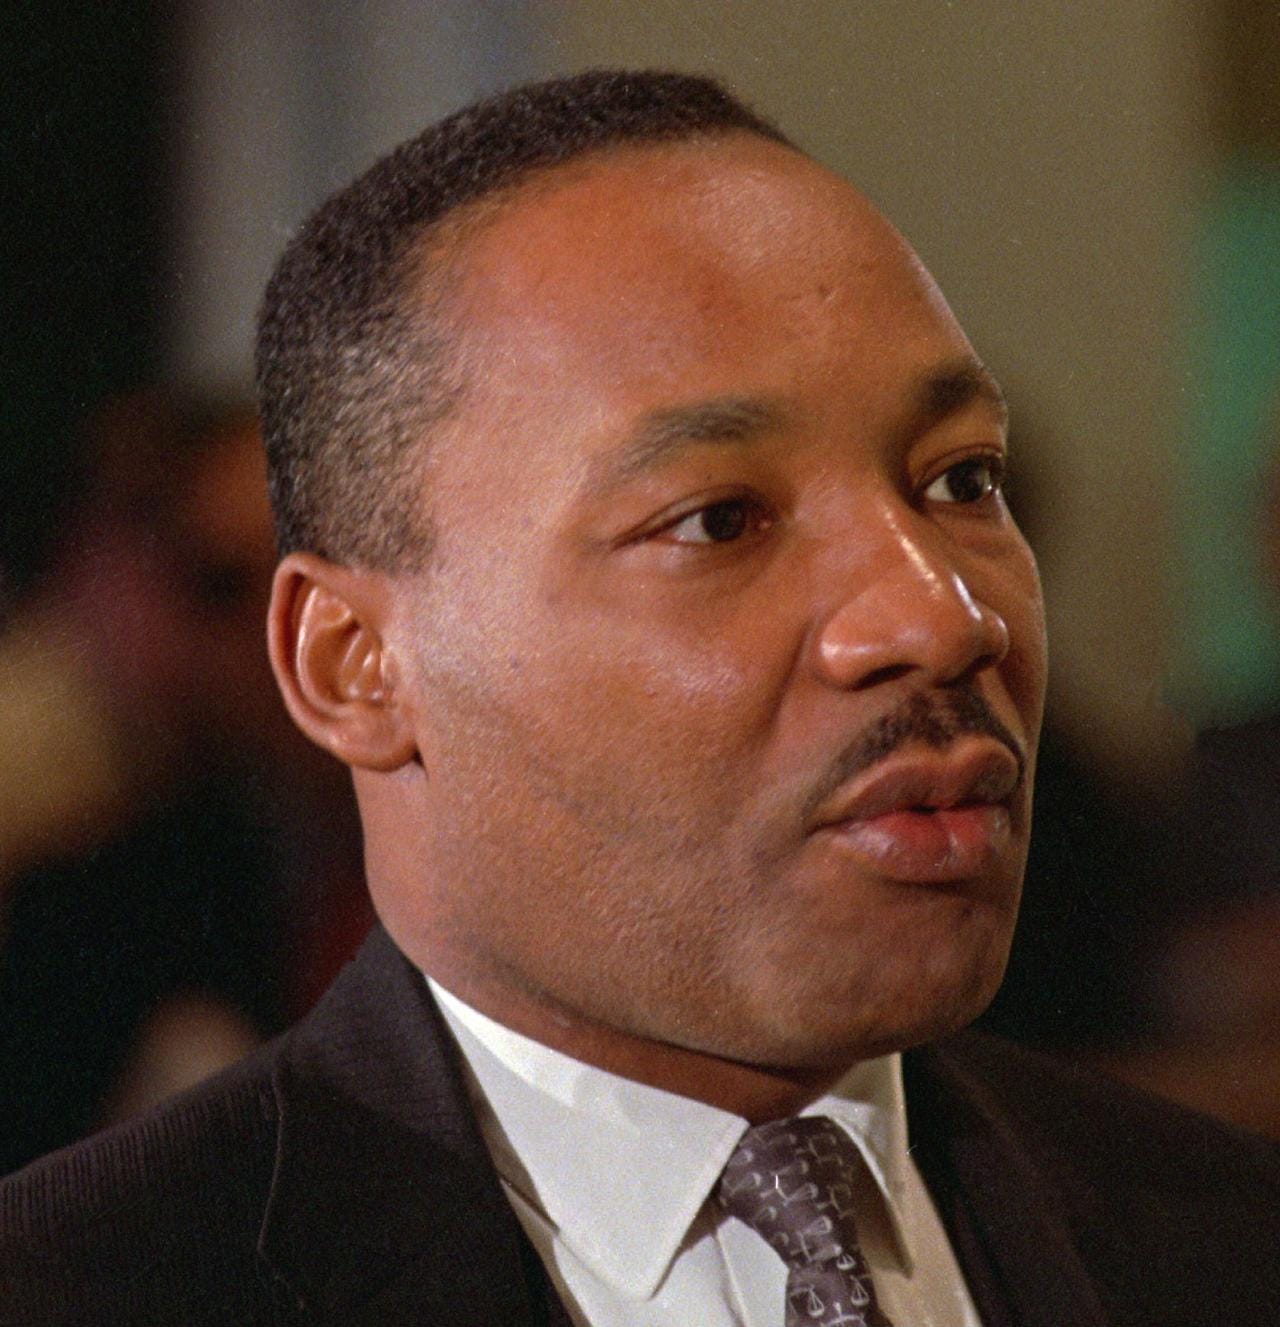 All This Is That: Images of Dr. Martin Luther King, Jr.